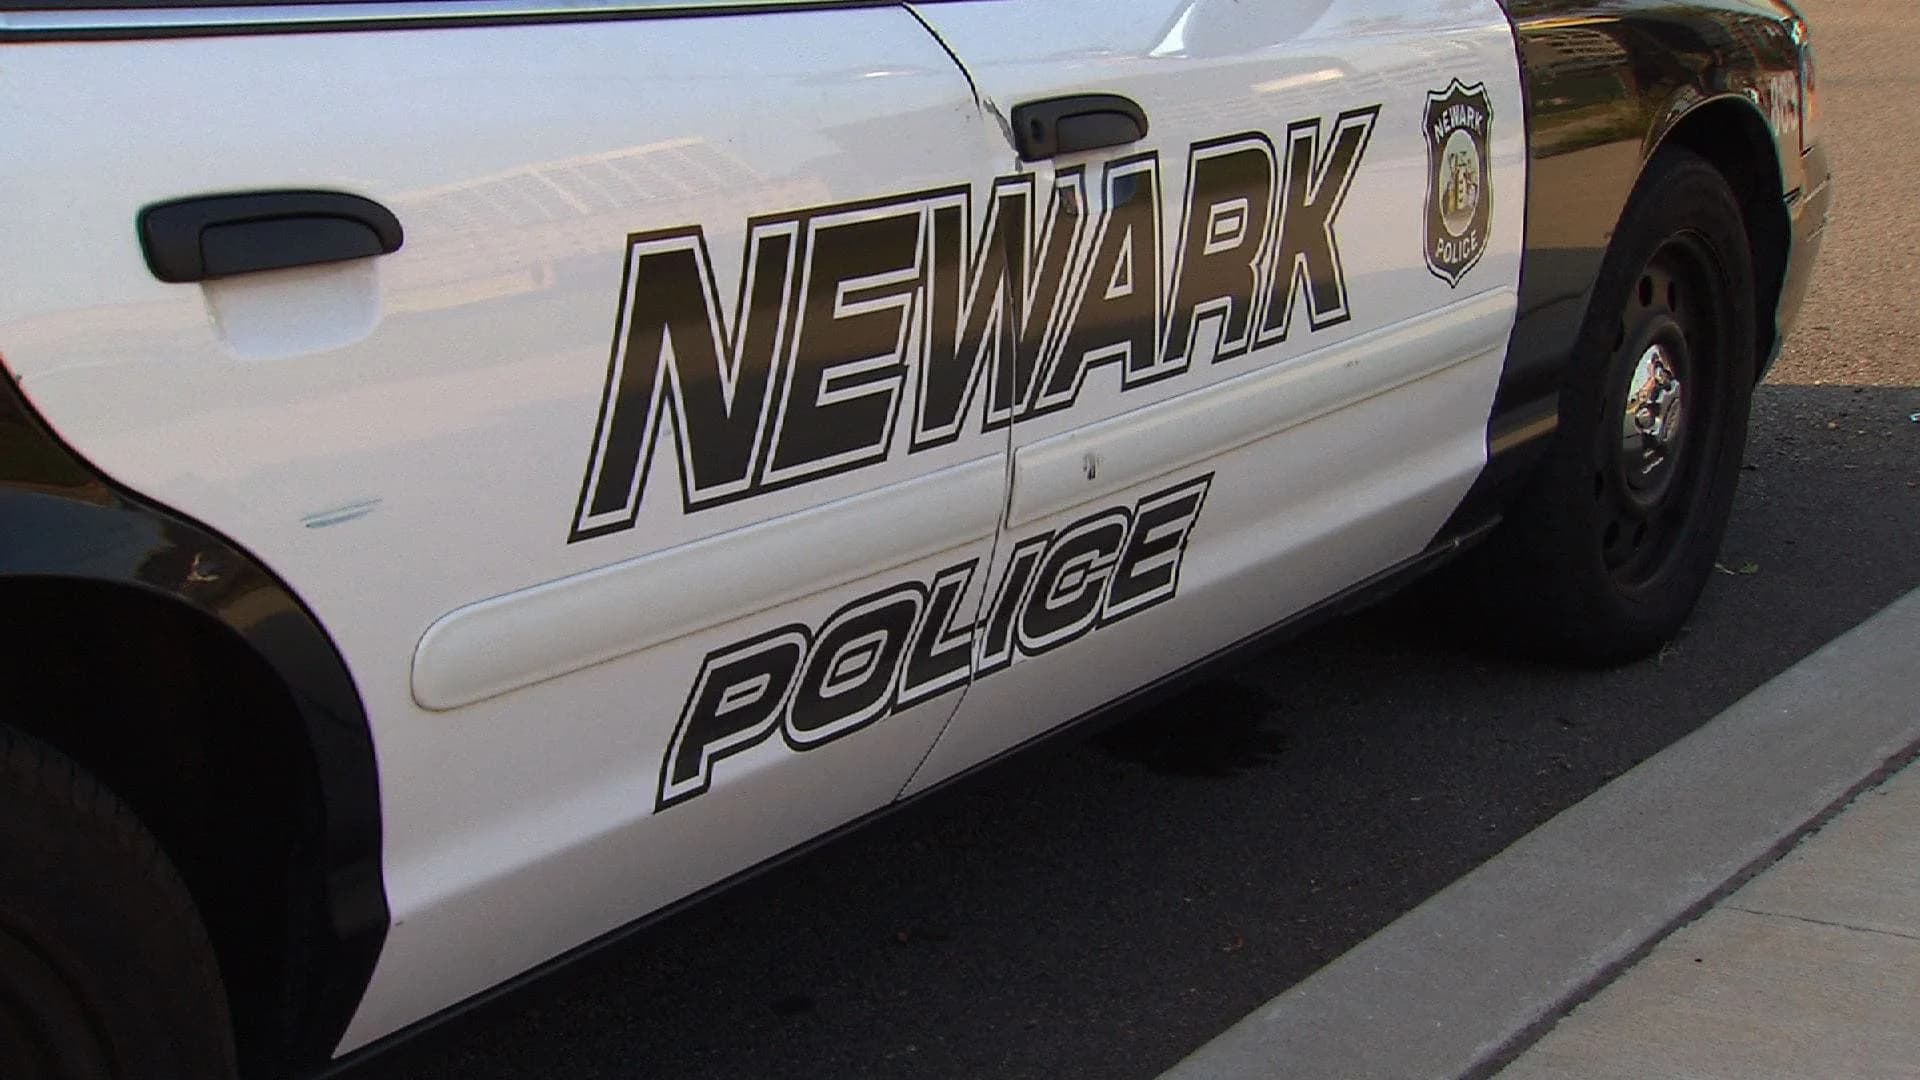 Prosecutors probe Newark police shooting that killed 1, critically injured another